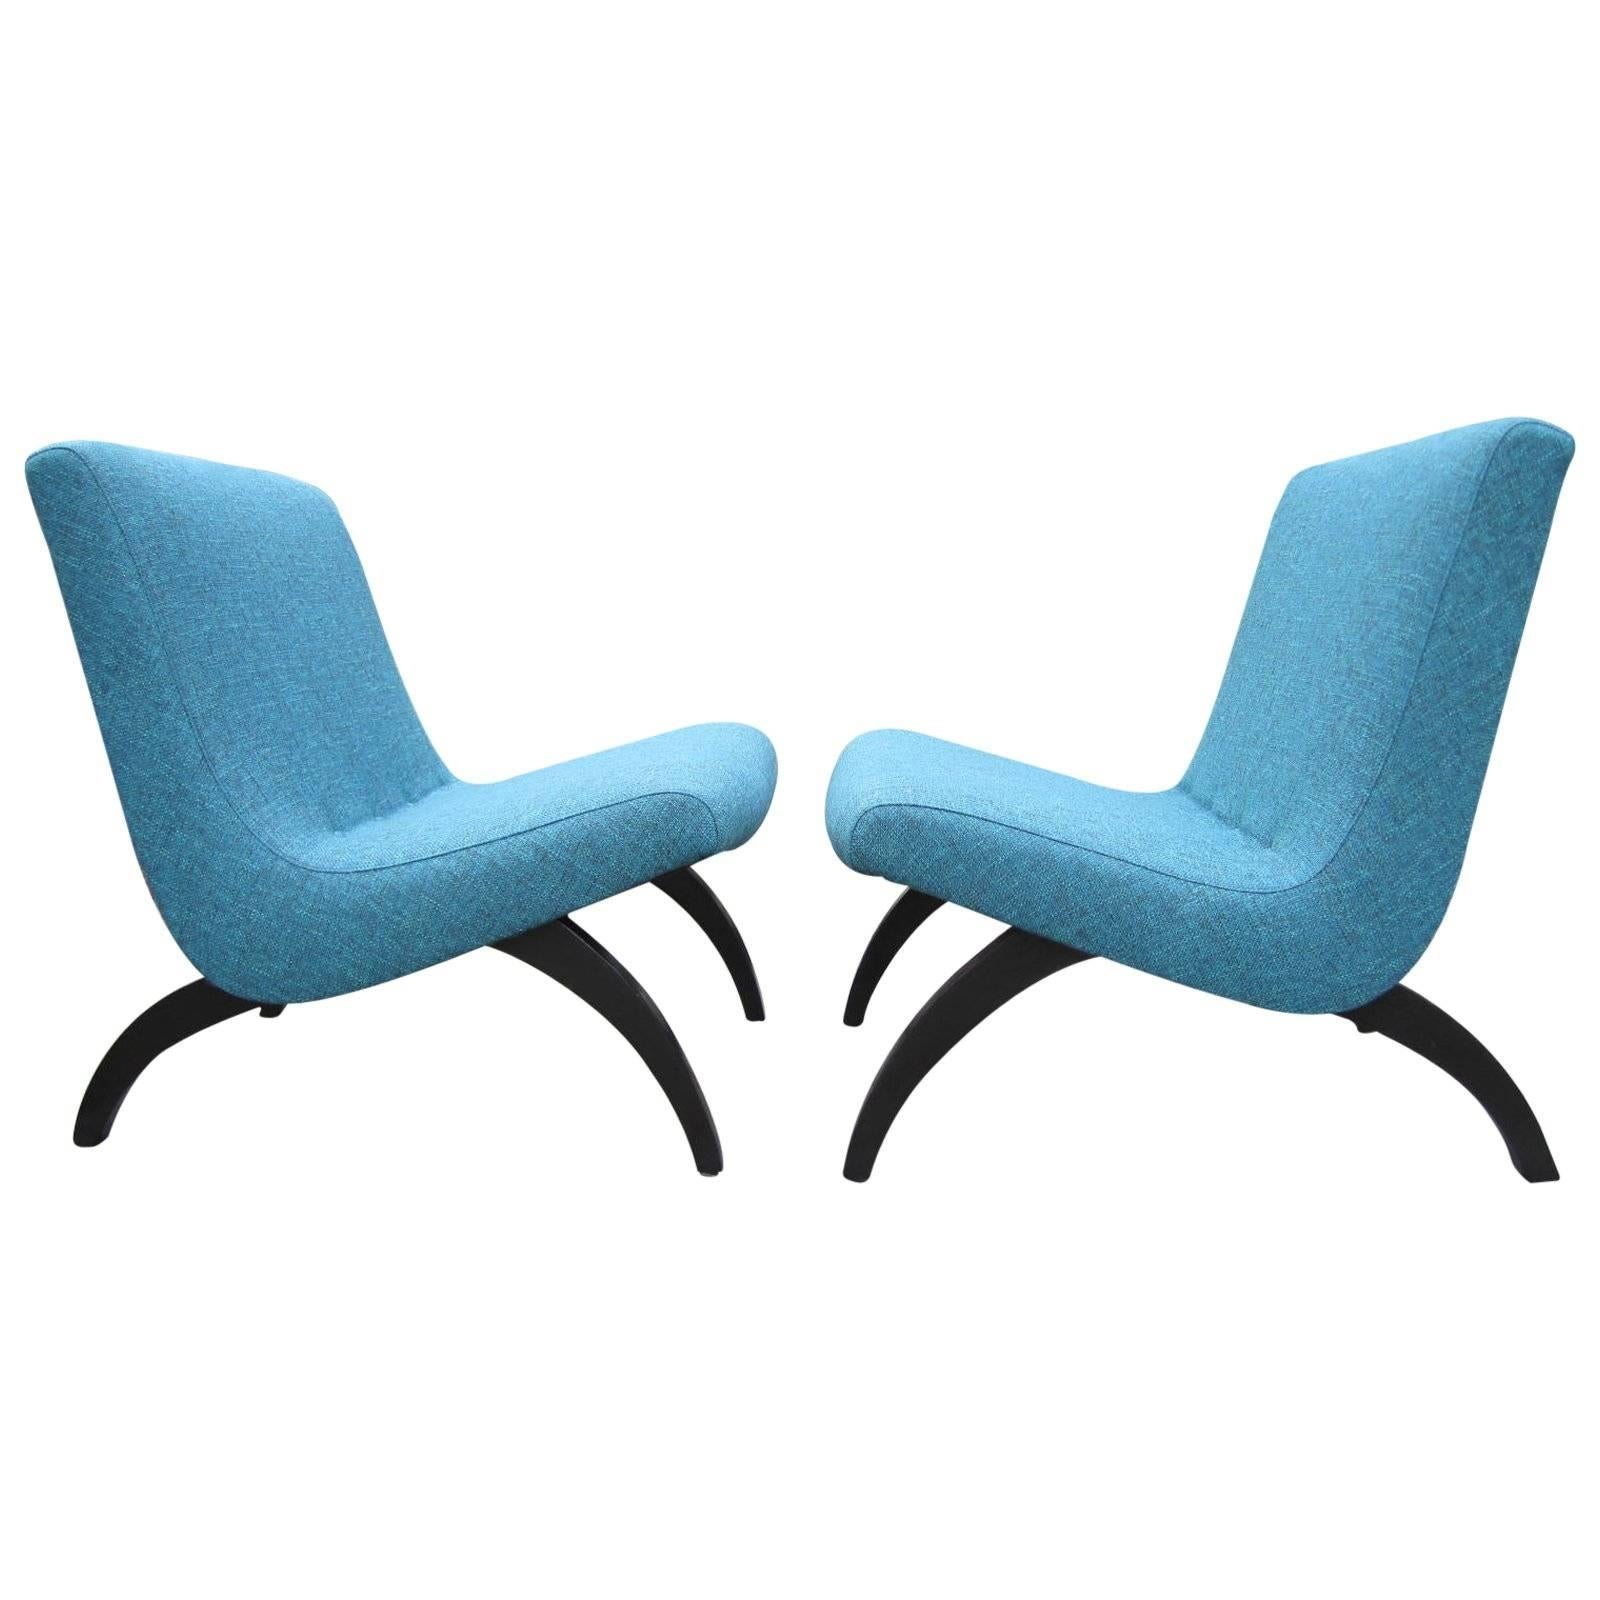 Pair of Milo Baughman Scoop Lounge Chairs for Thayer Coggin